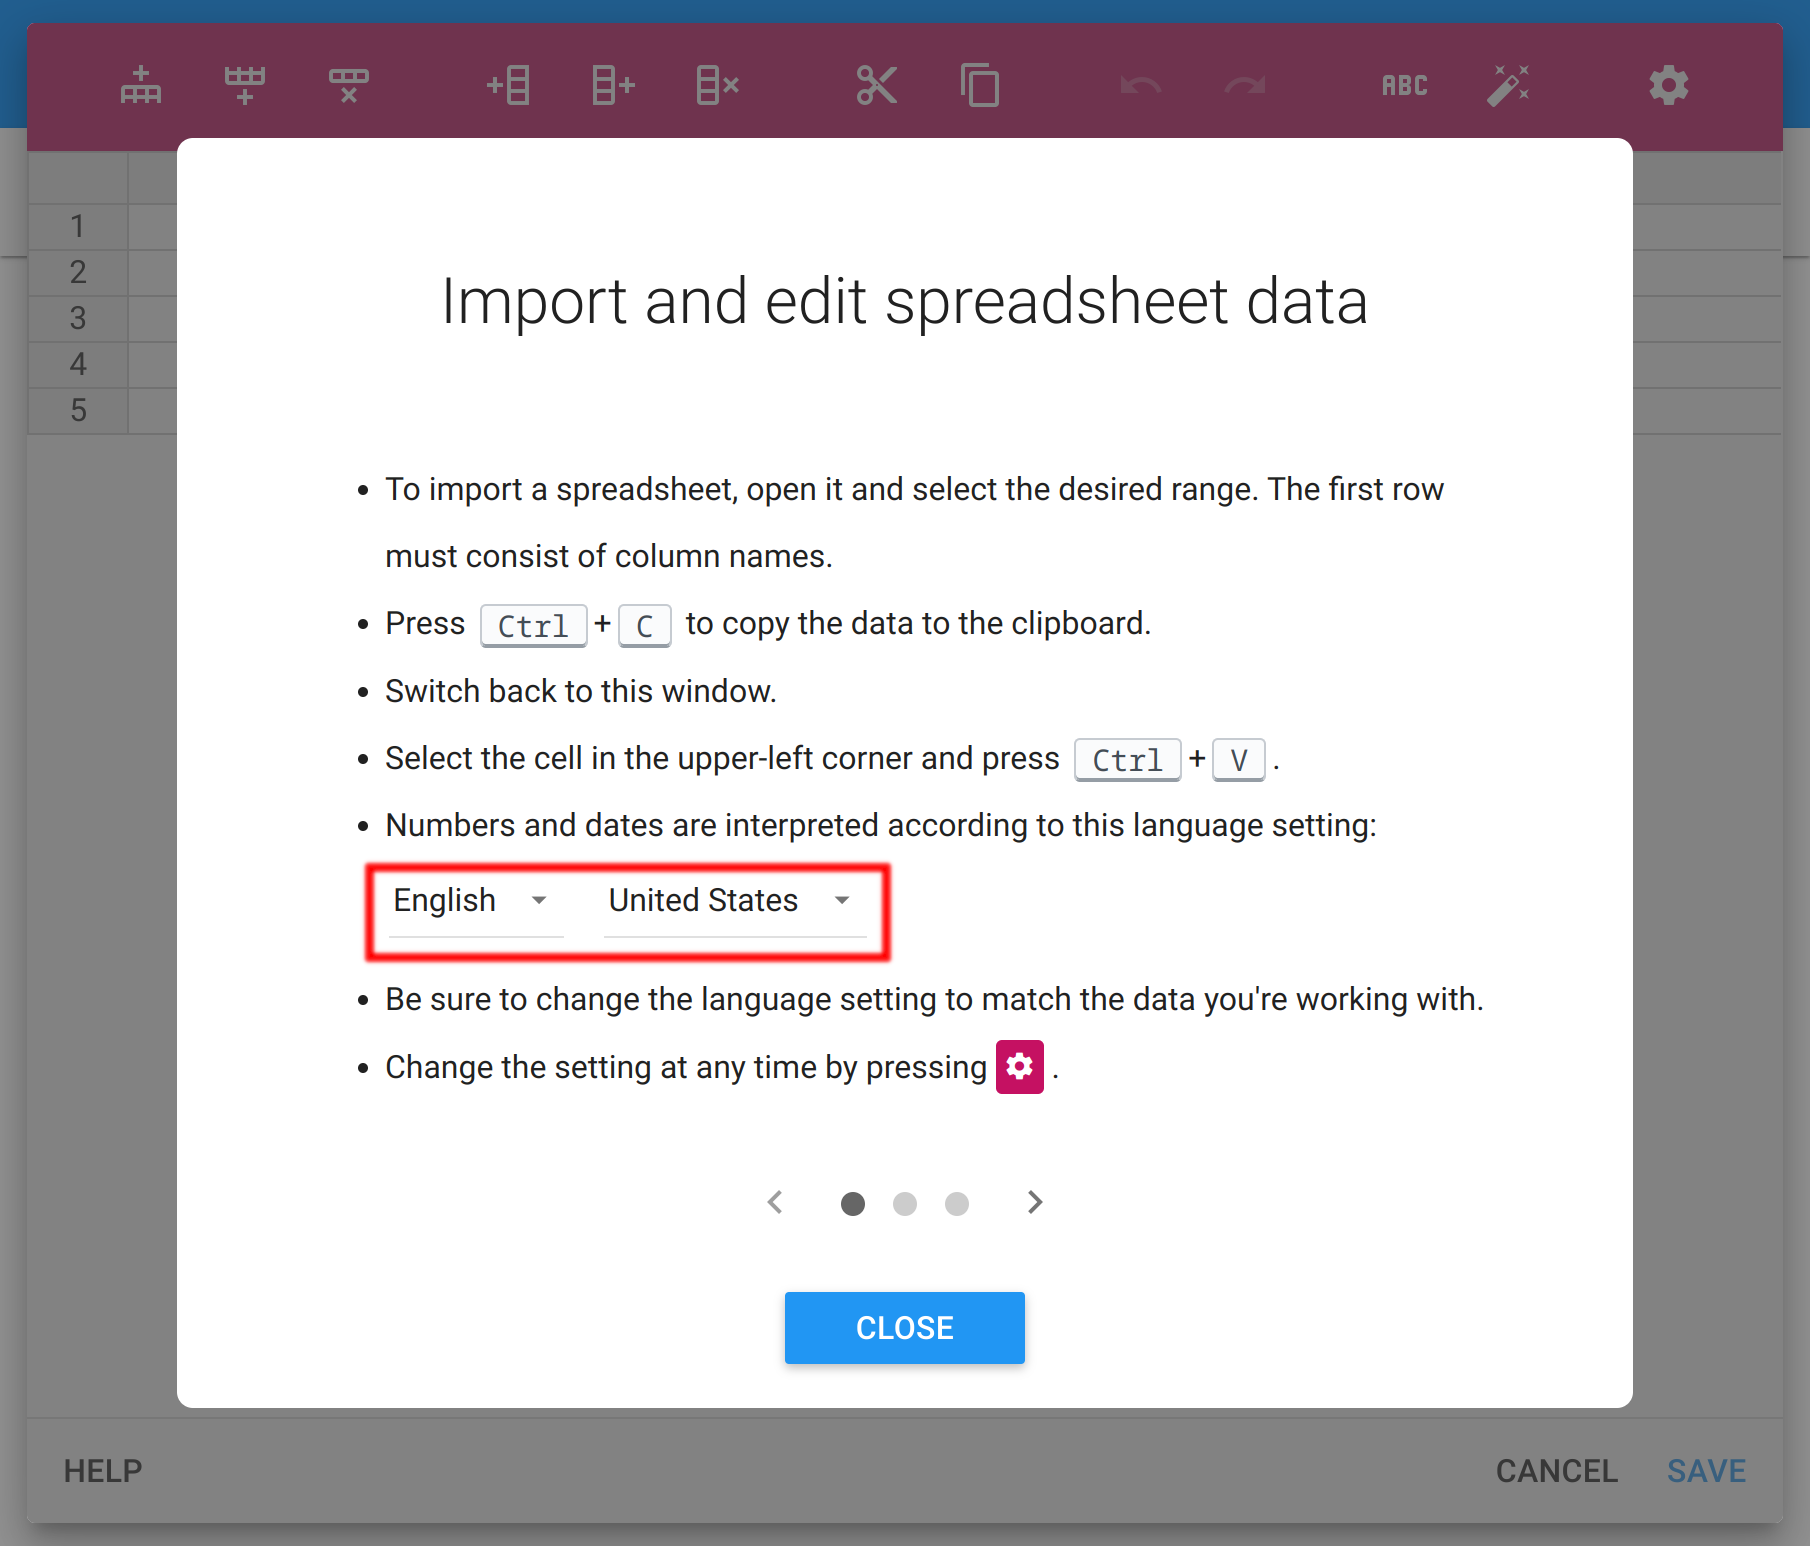 Setting the language in our new data editor